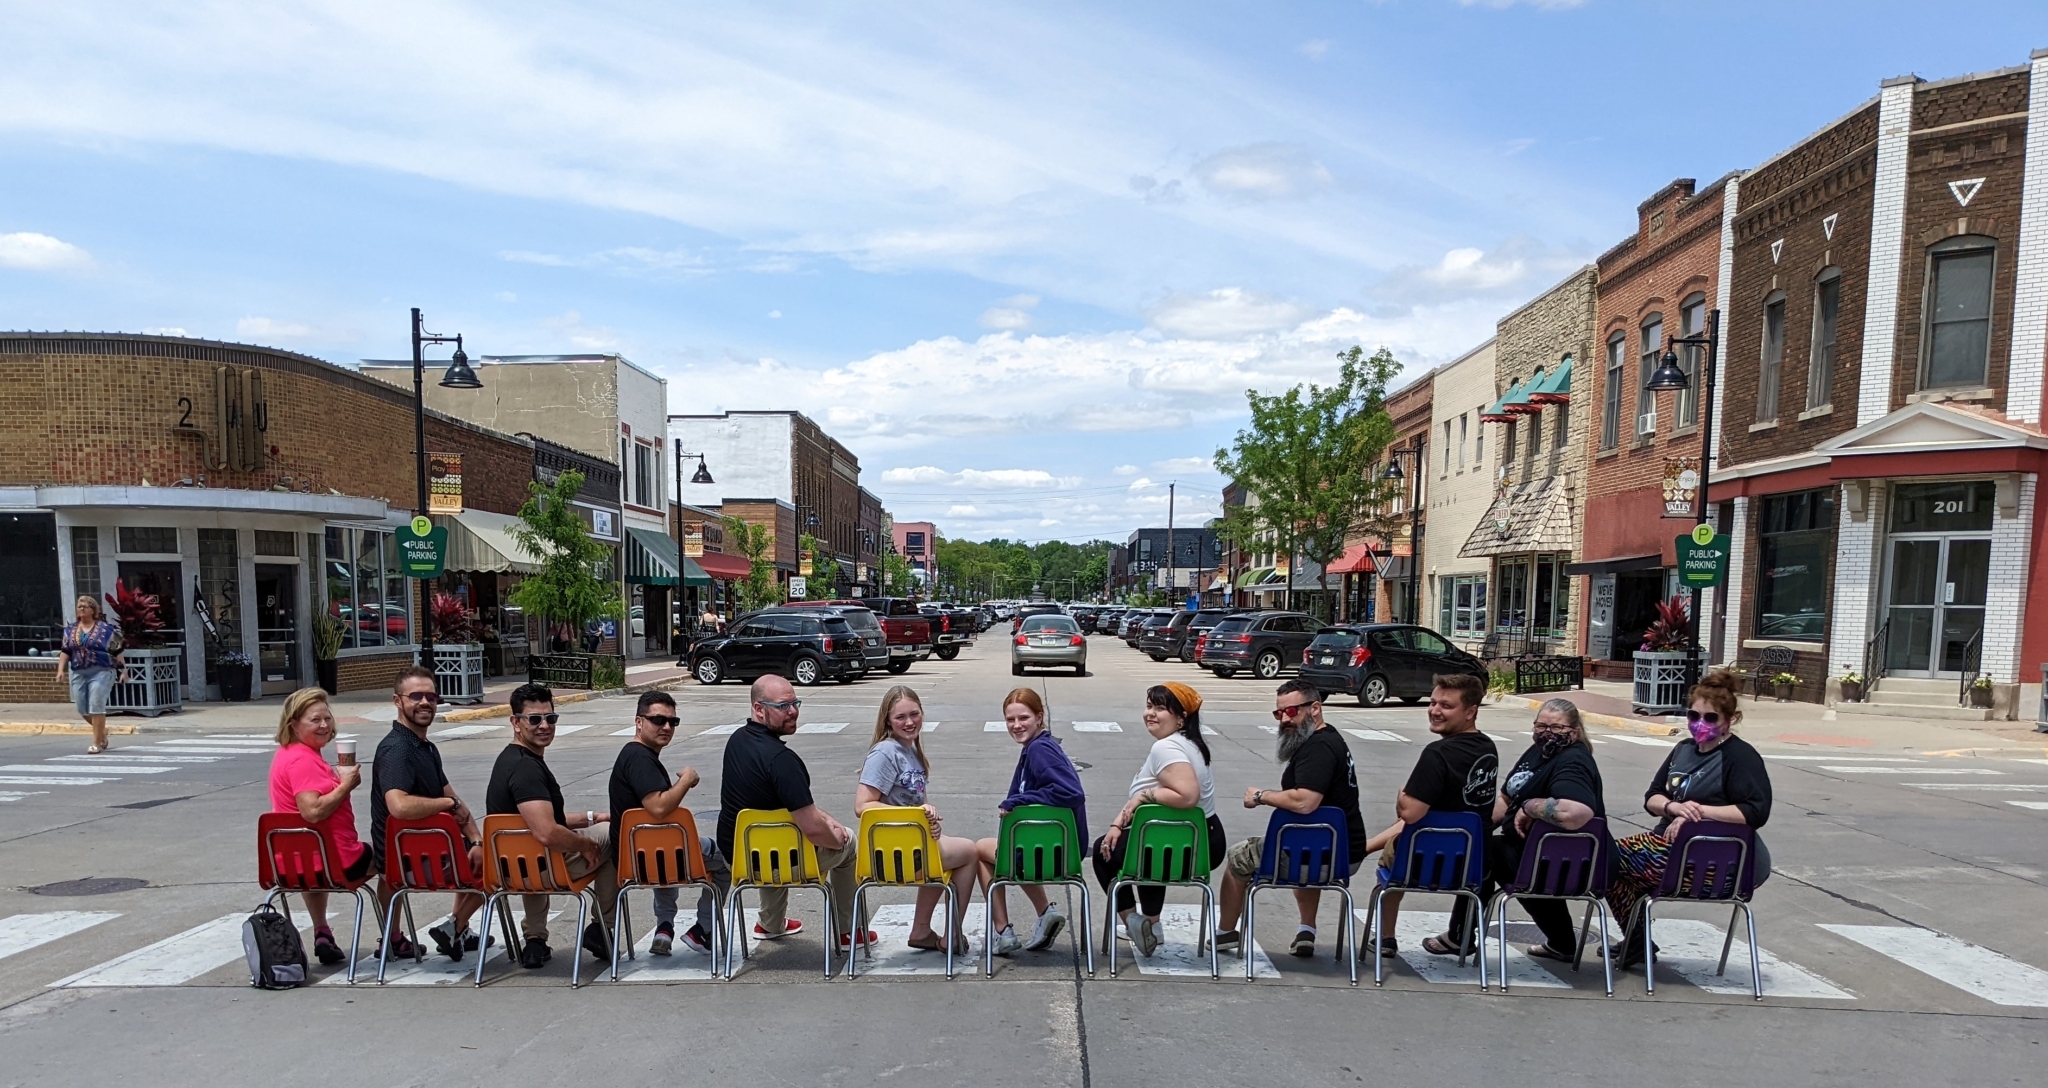 Community members in Downtown Valley Junction in West Des Moines, Iowa celebrate Pride Month sitting in colorful chairs